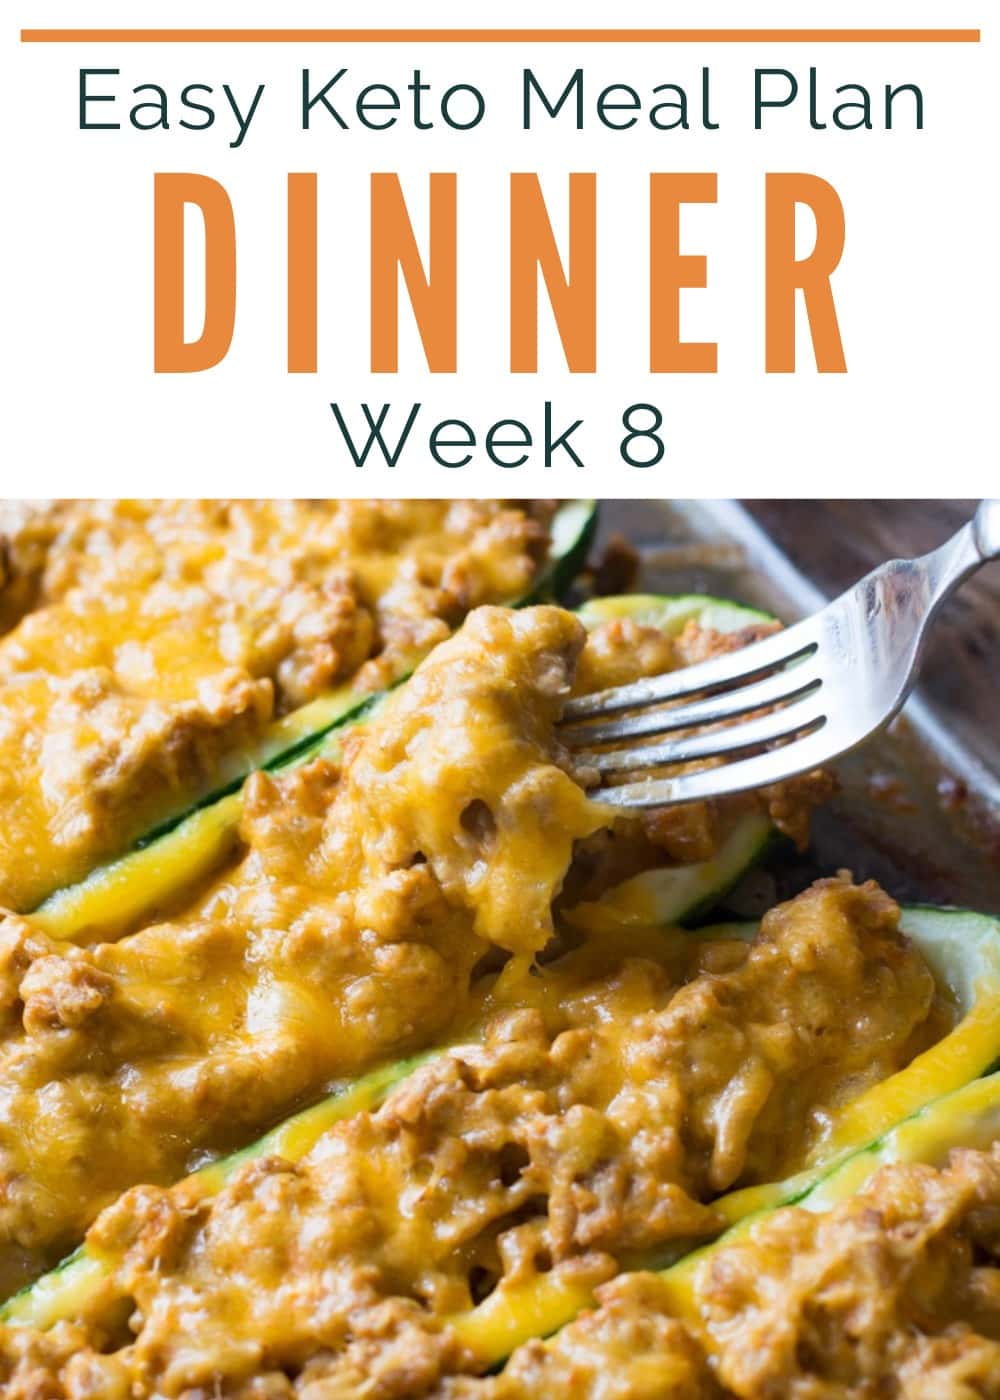 Here is Week 8 of our Easy Keto Meal Plan! I've included 5 EASY low-carb dinners, a keto dessert, net carb counts, and a printable shopping list!